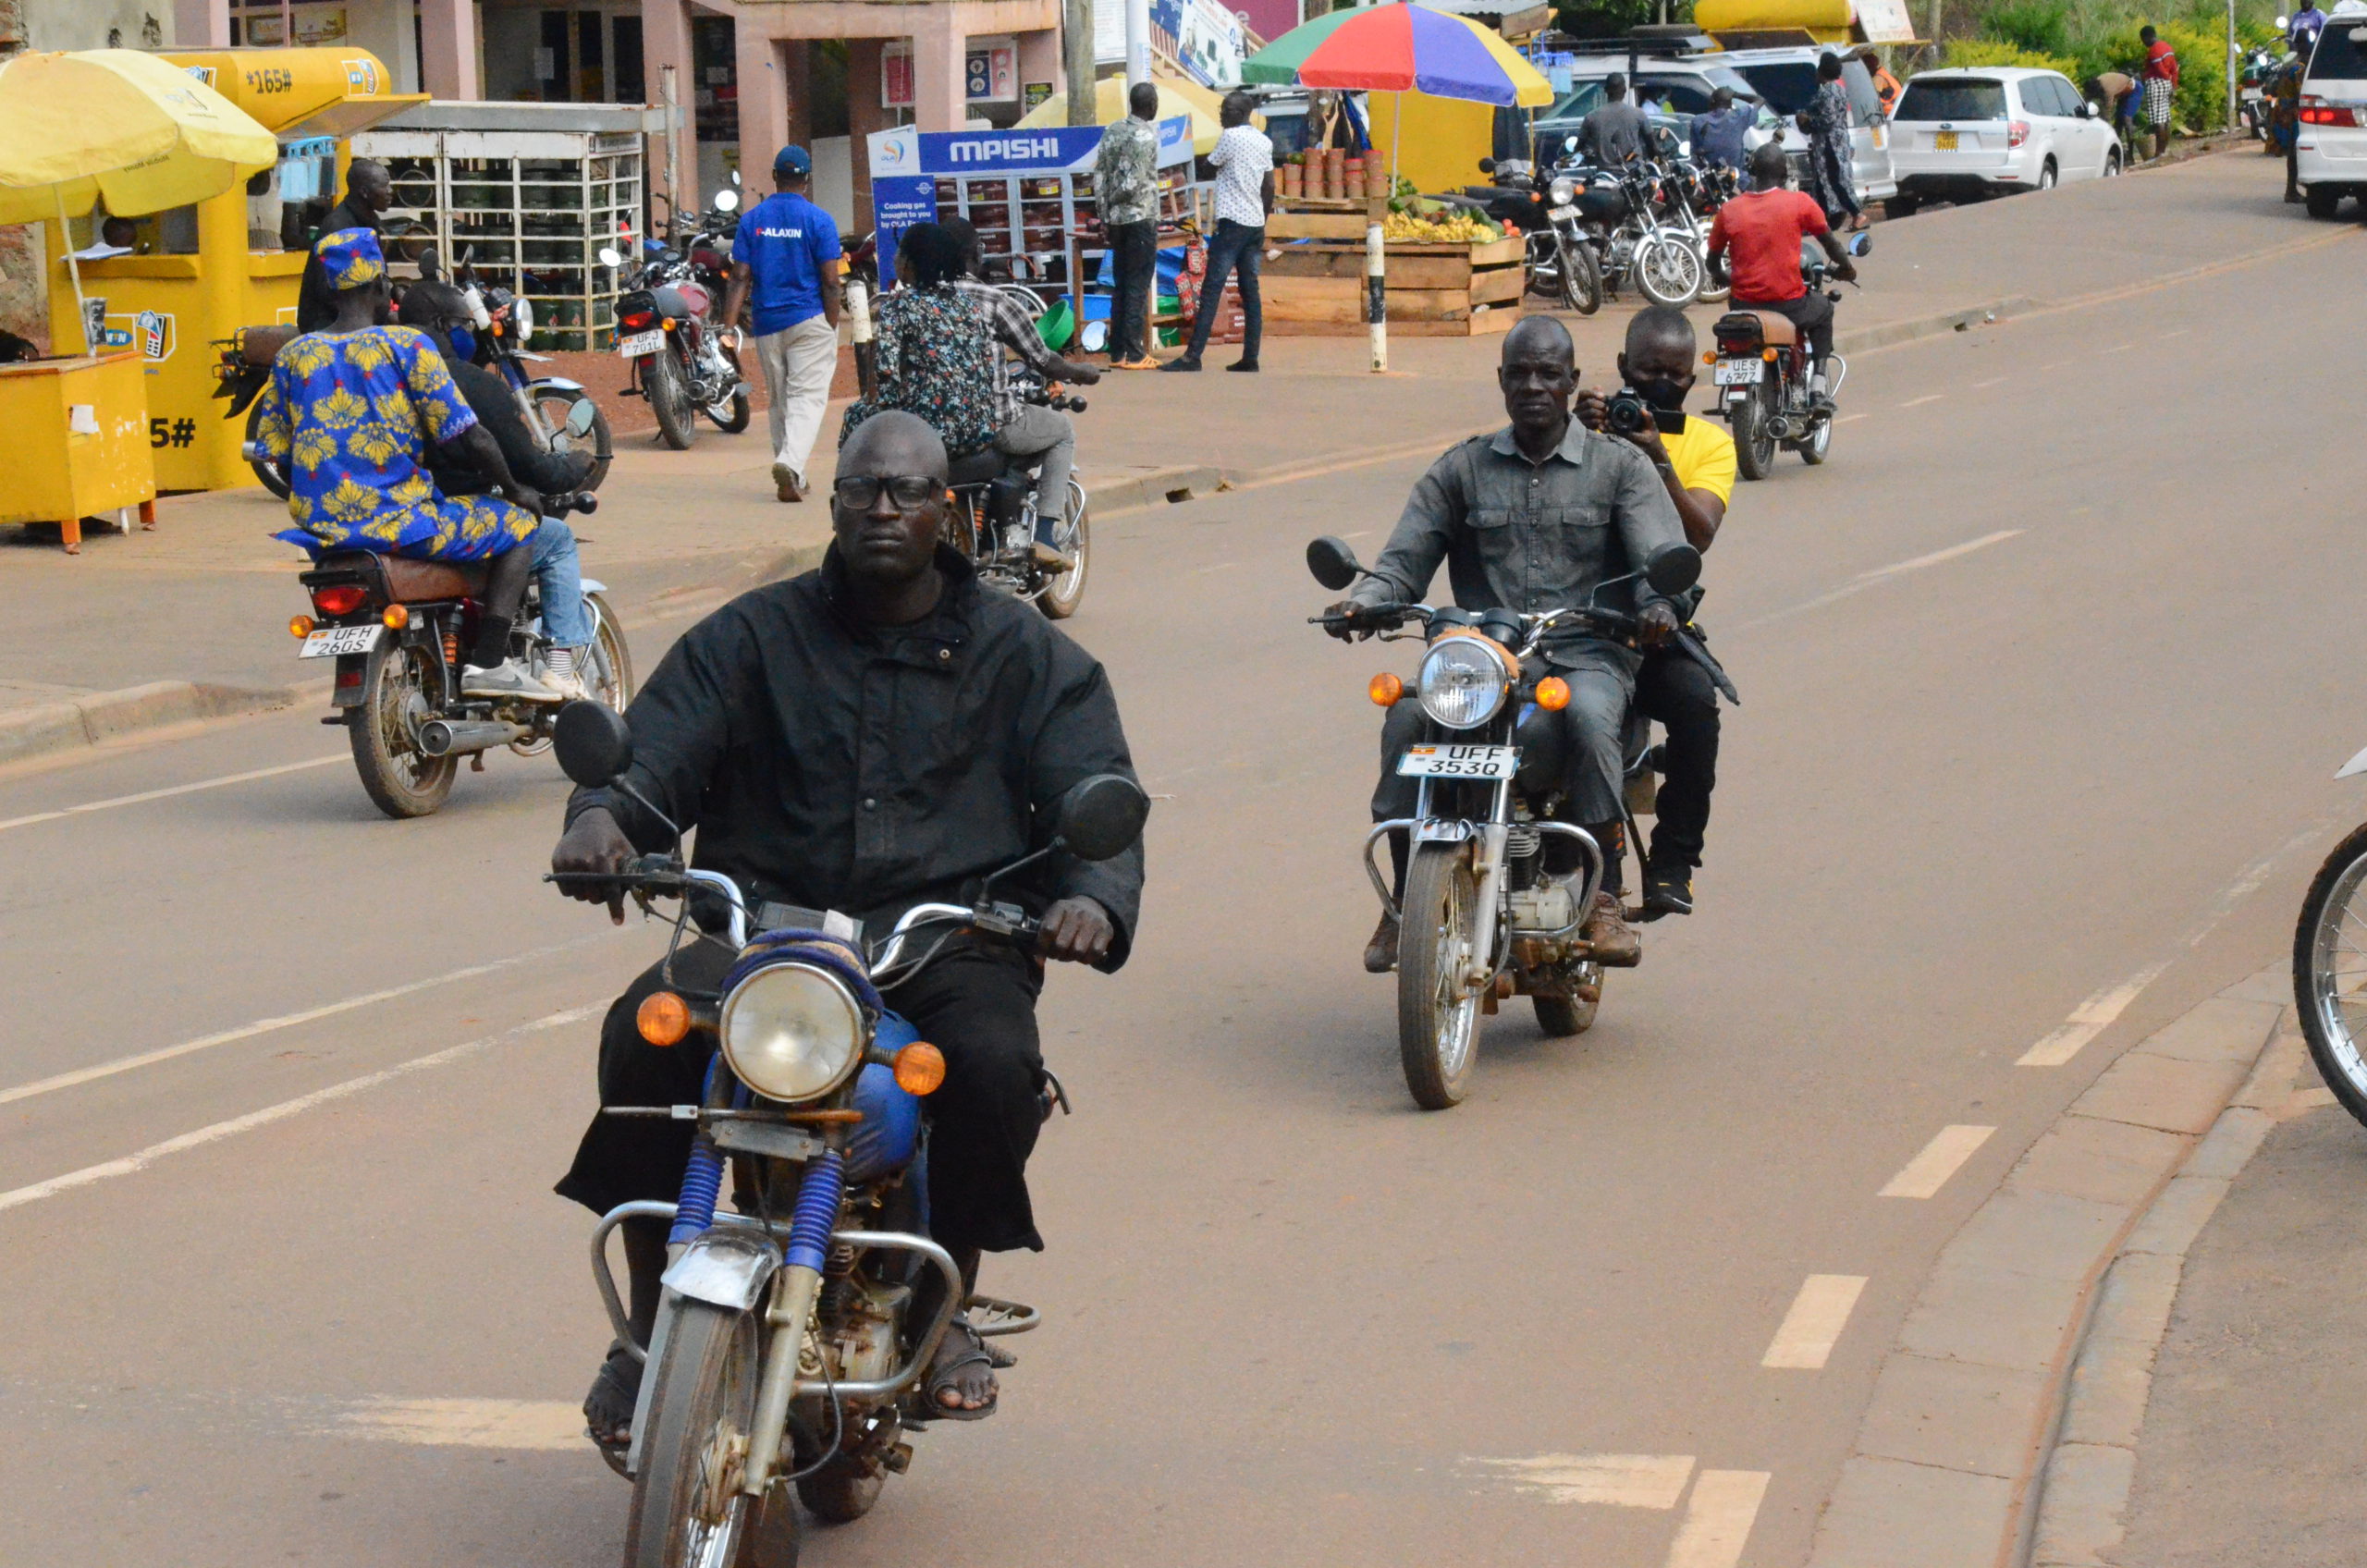 Motor-cycle taxis accused of causing road accidents in Africa